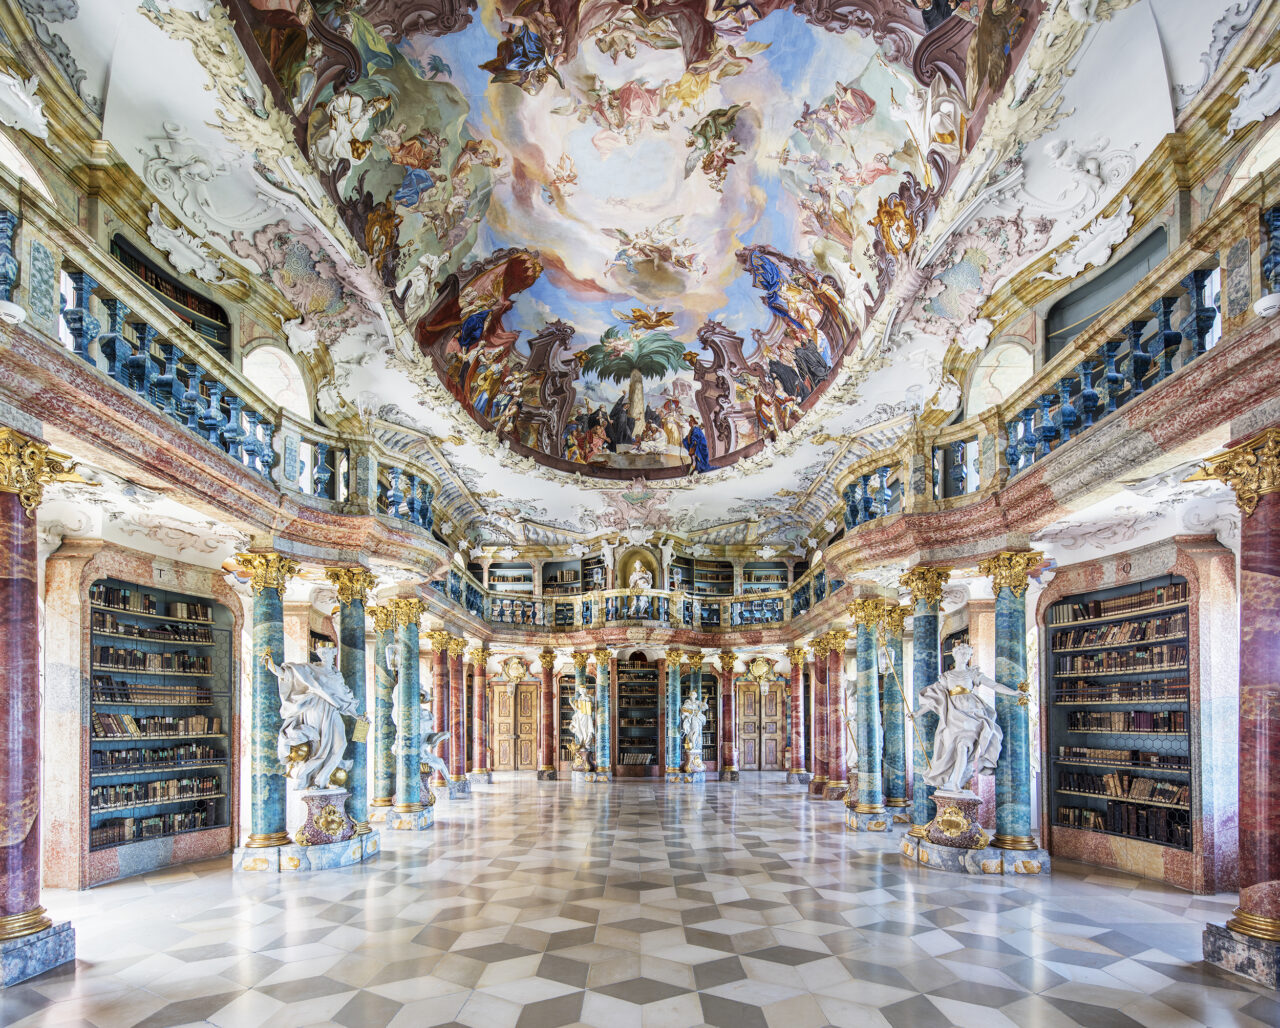 A Photographic Journey to the World’s Most Magical Libraries